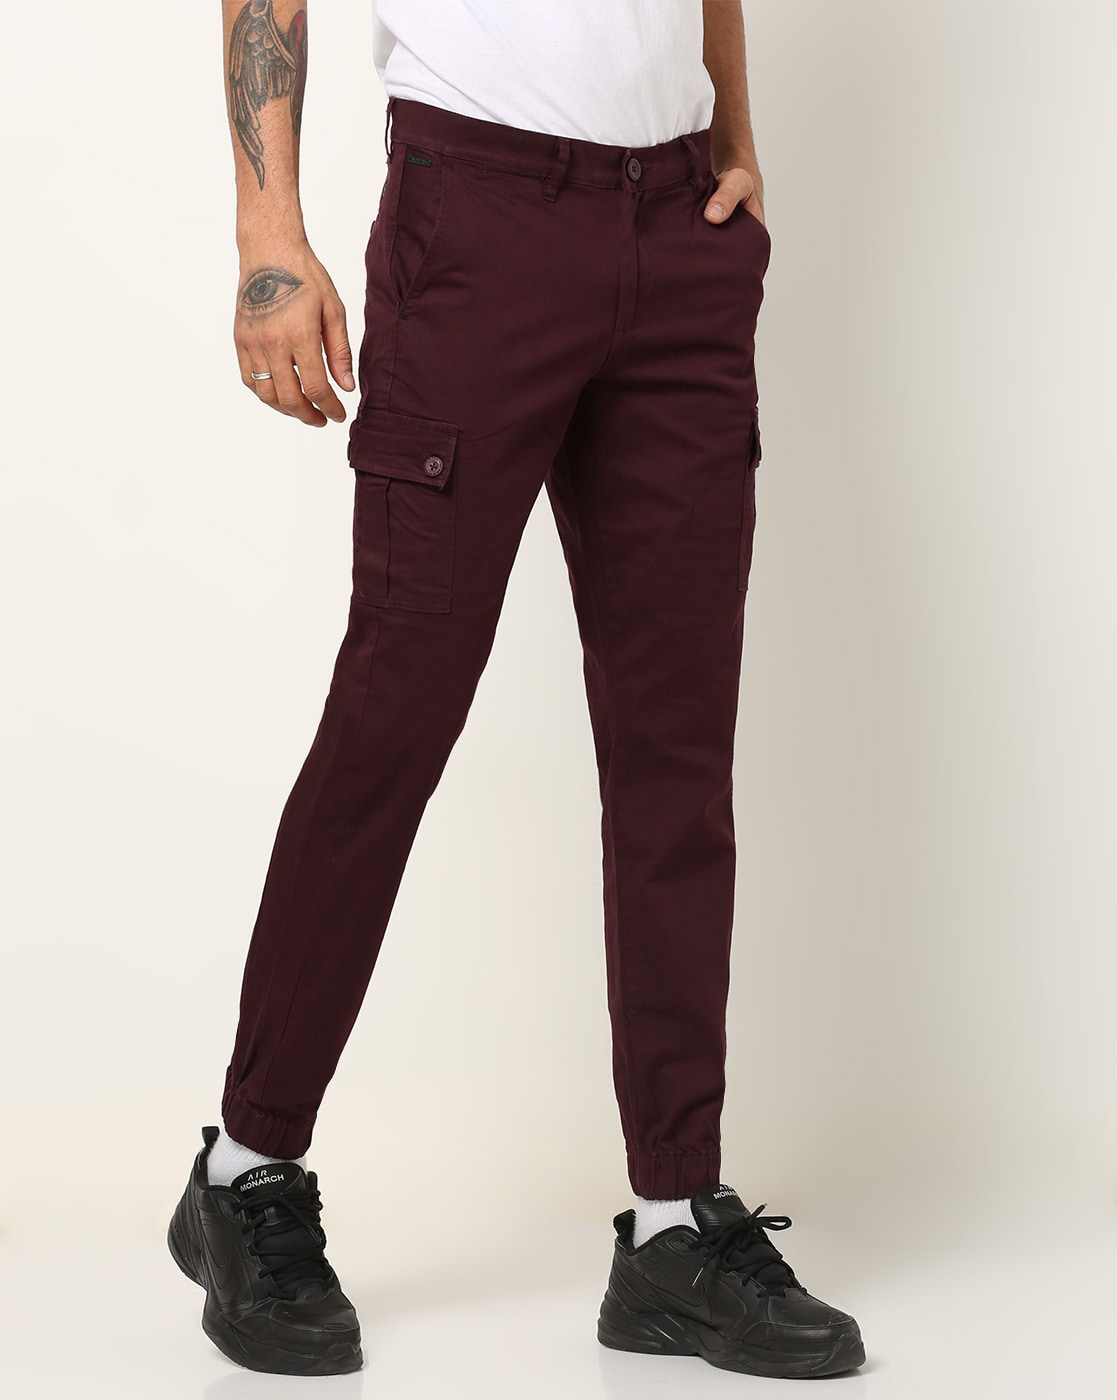 Buy Burgundy Trousers & Pants for Men by The Indian Garage Co |